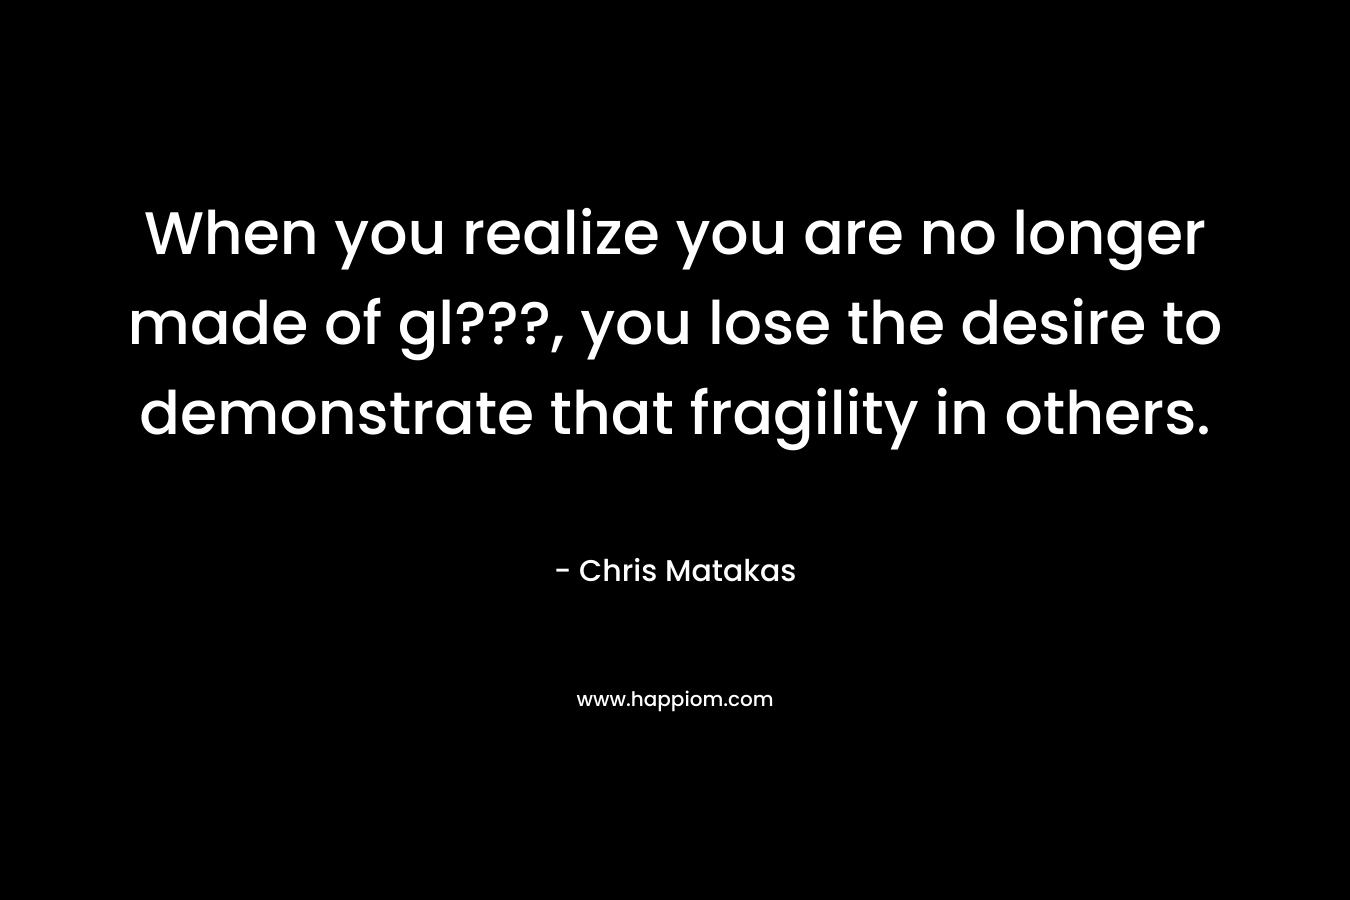 When you realize you are no longer made of gl???, you lose the desire to demonstrate that fragility in others.